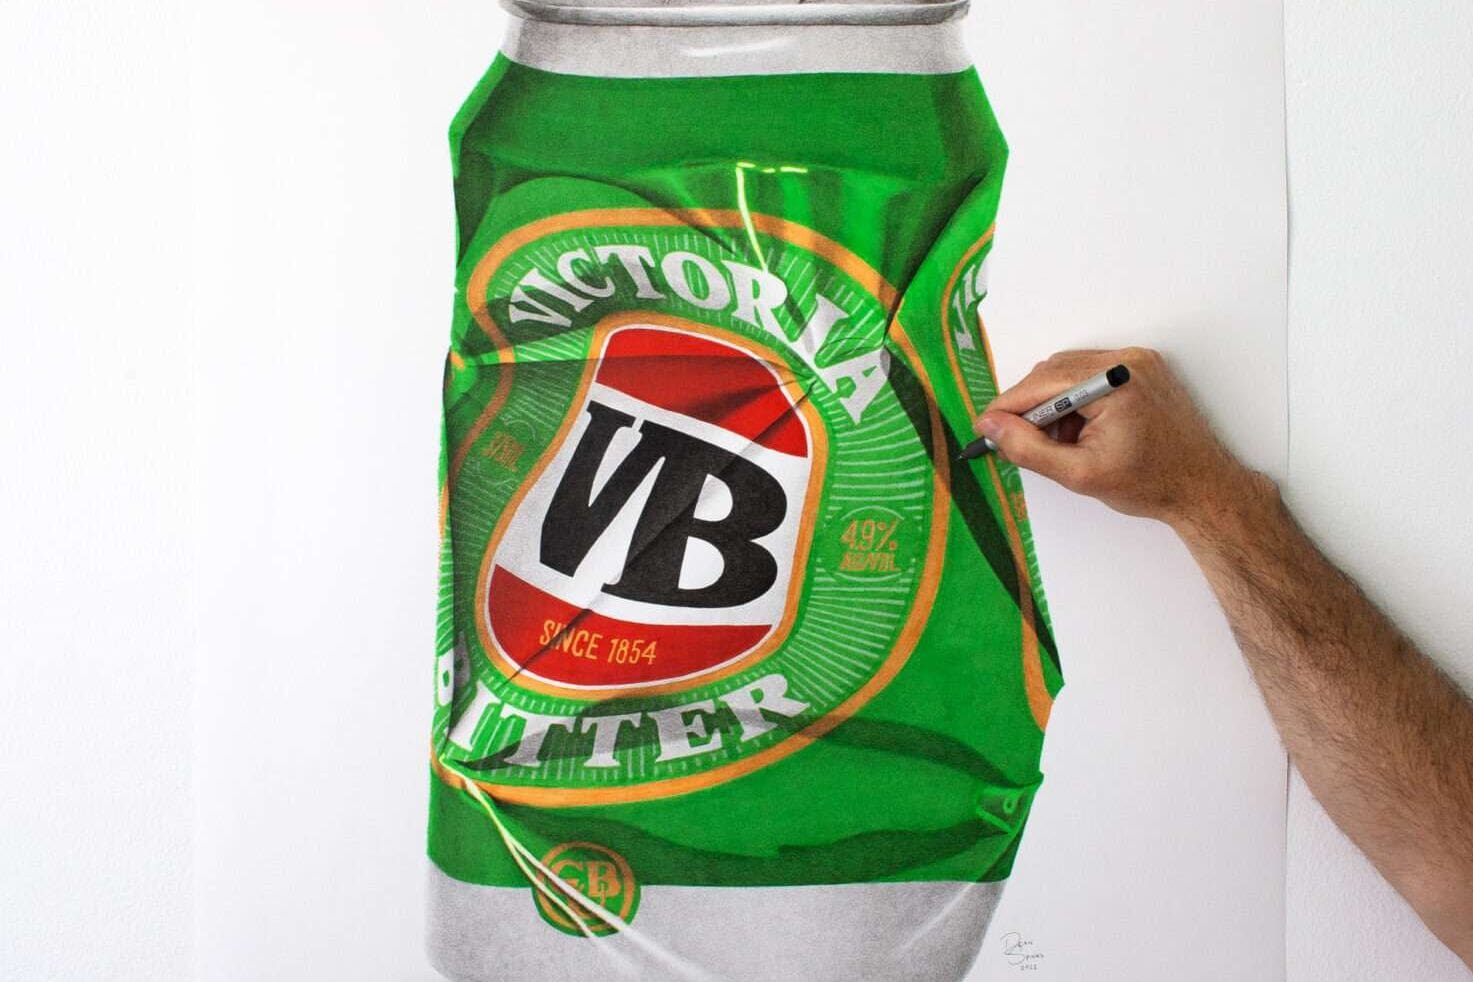 Victoria Bitter beer can hand drawn artwork